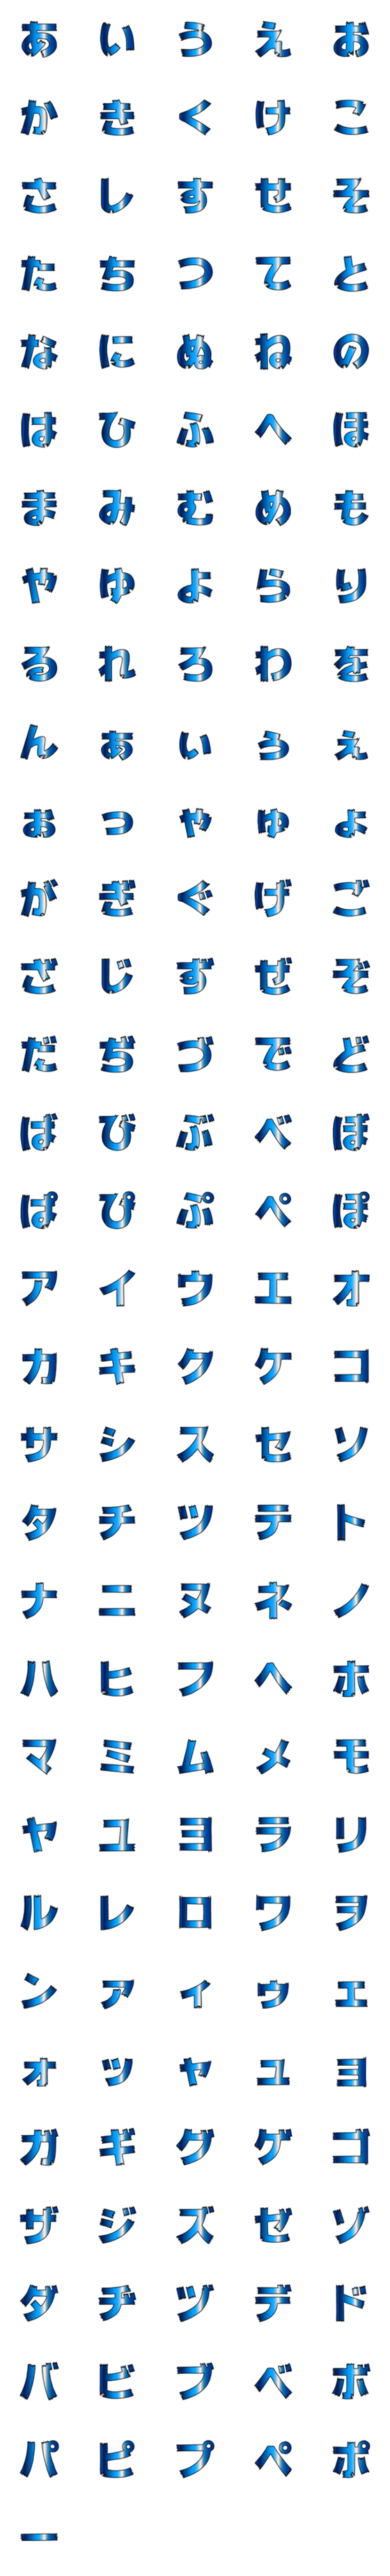 [LINE絵文字]aall-金ピカデコ文字 メタル青-かなカナの画像一覧